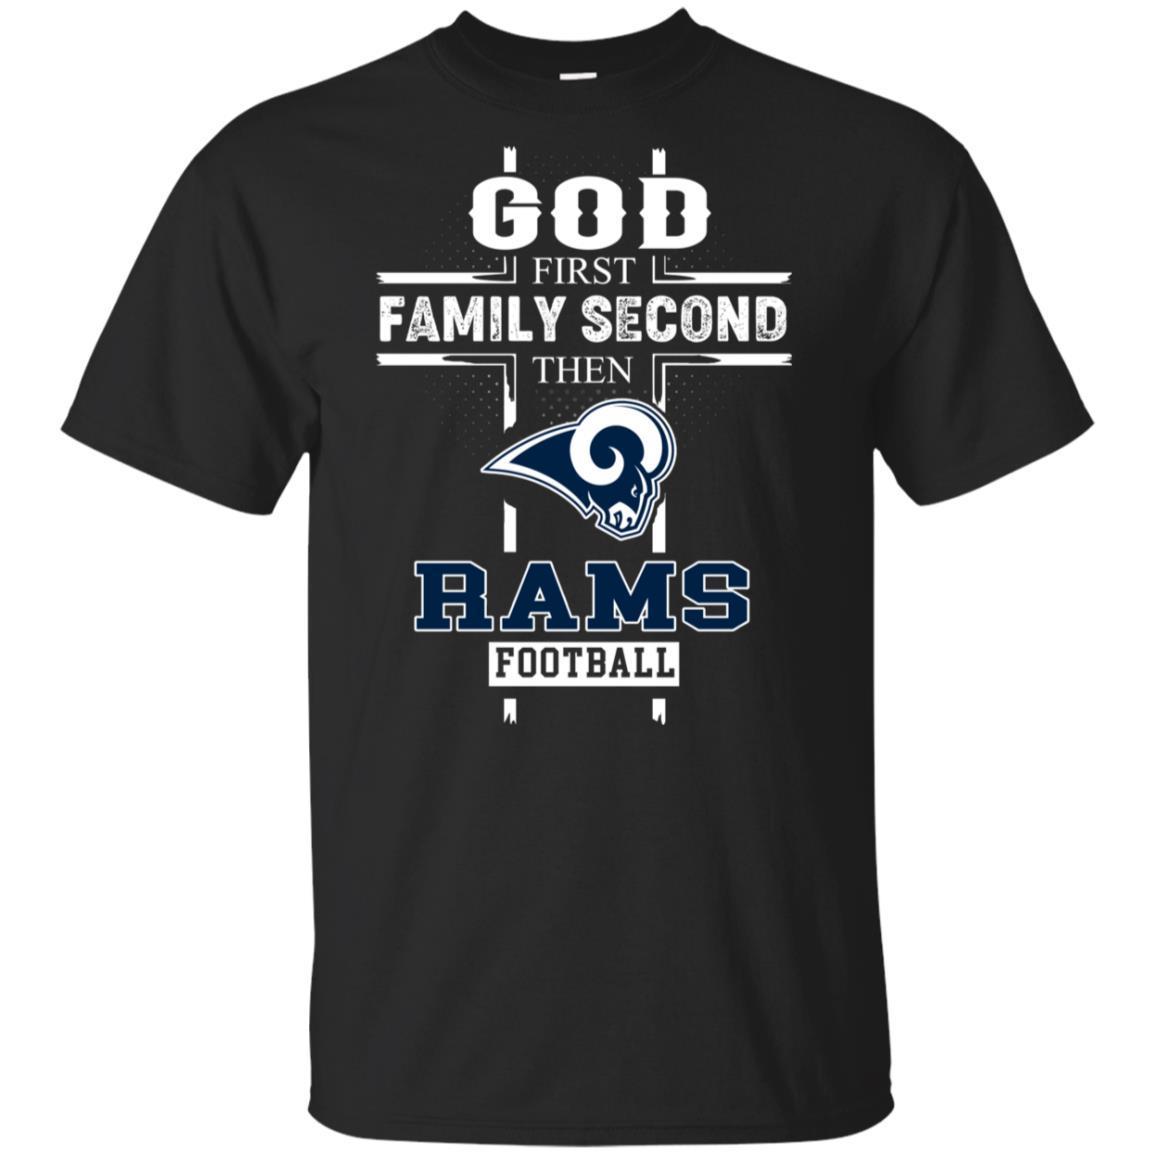 Shirt Funny God First Family Second Then Los Angeles Rams Football T-shirt